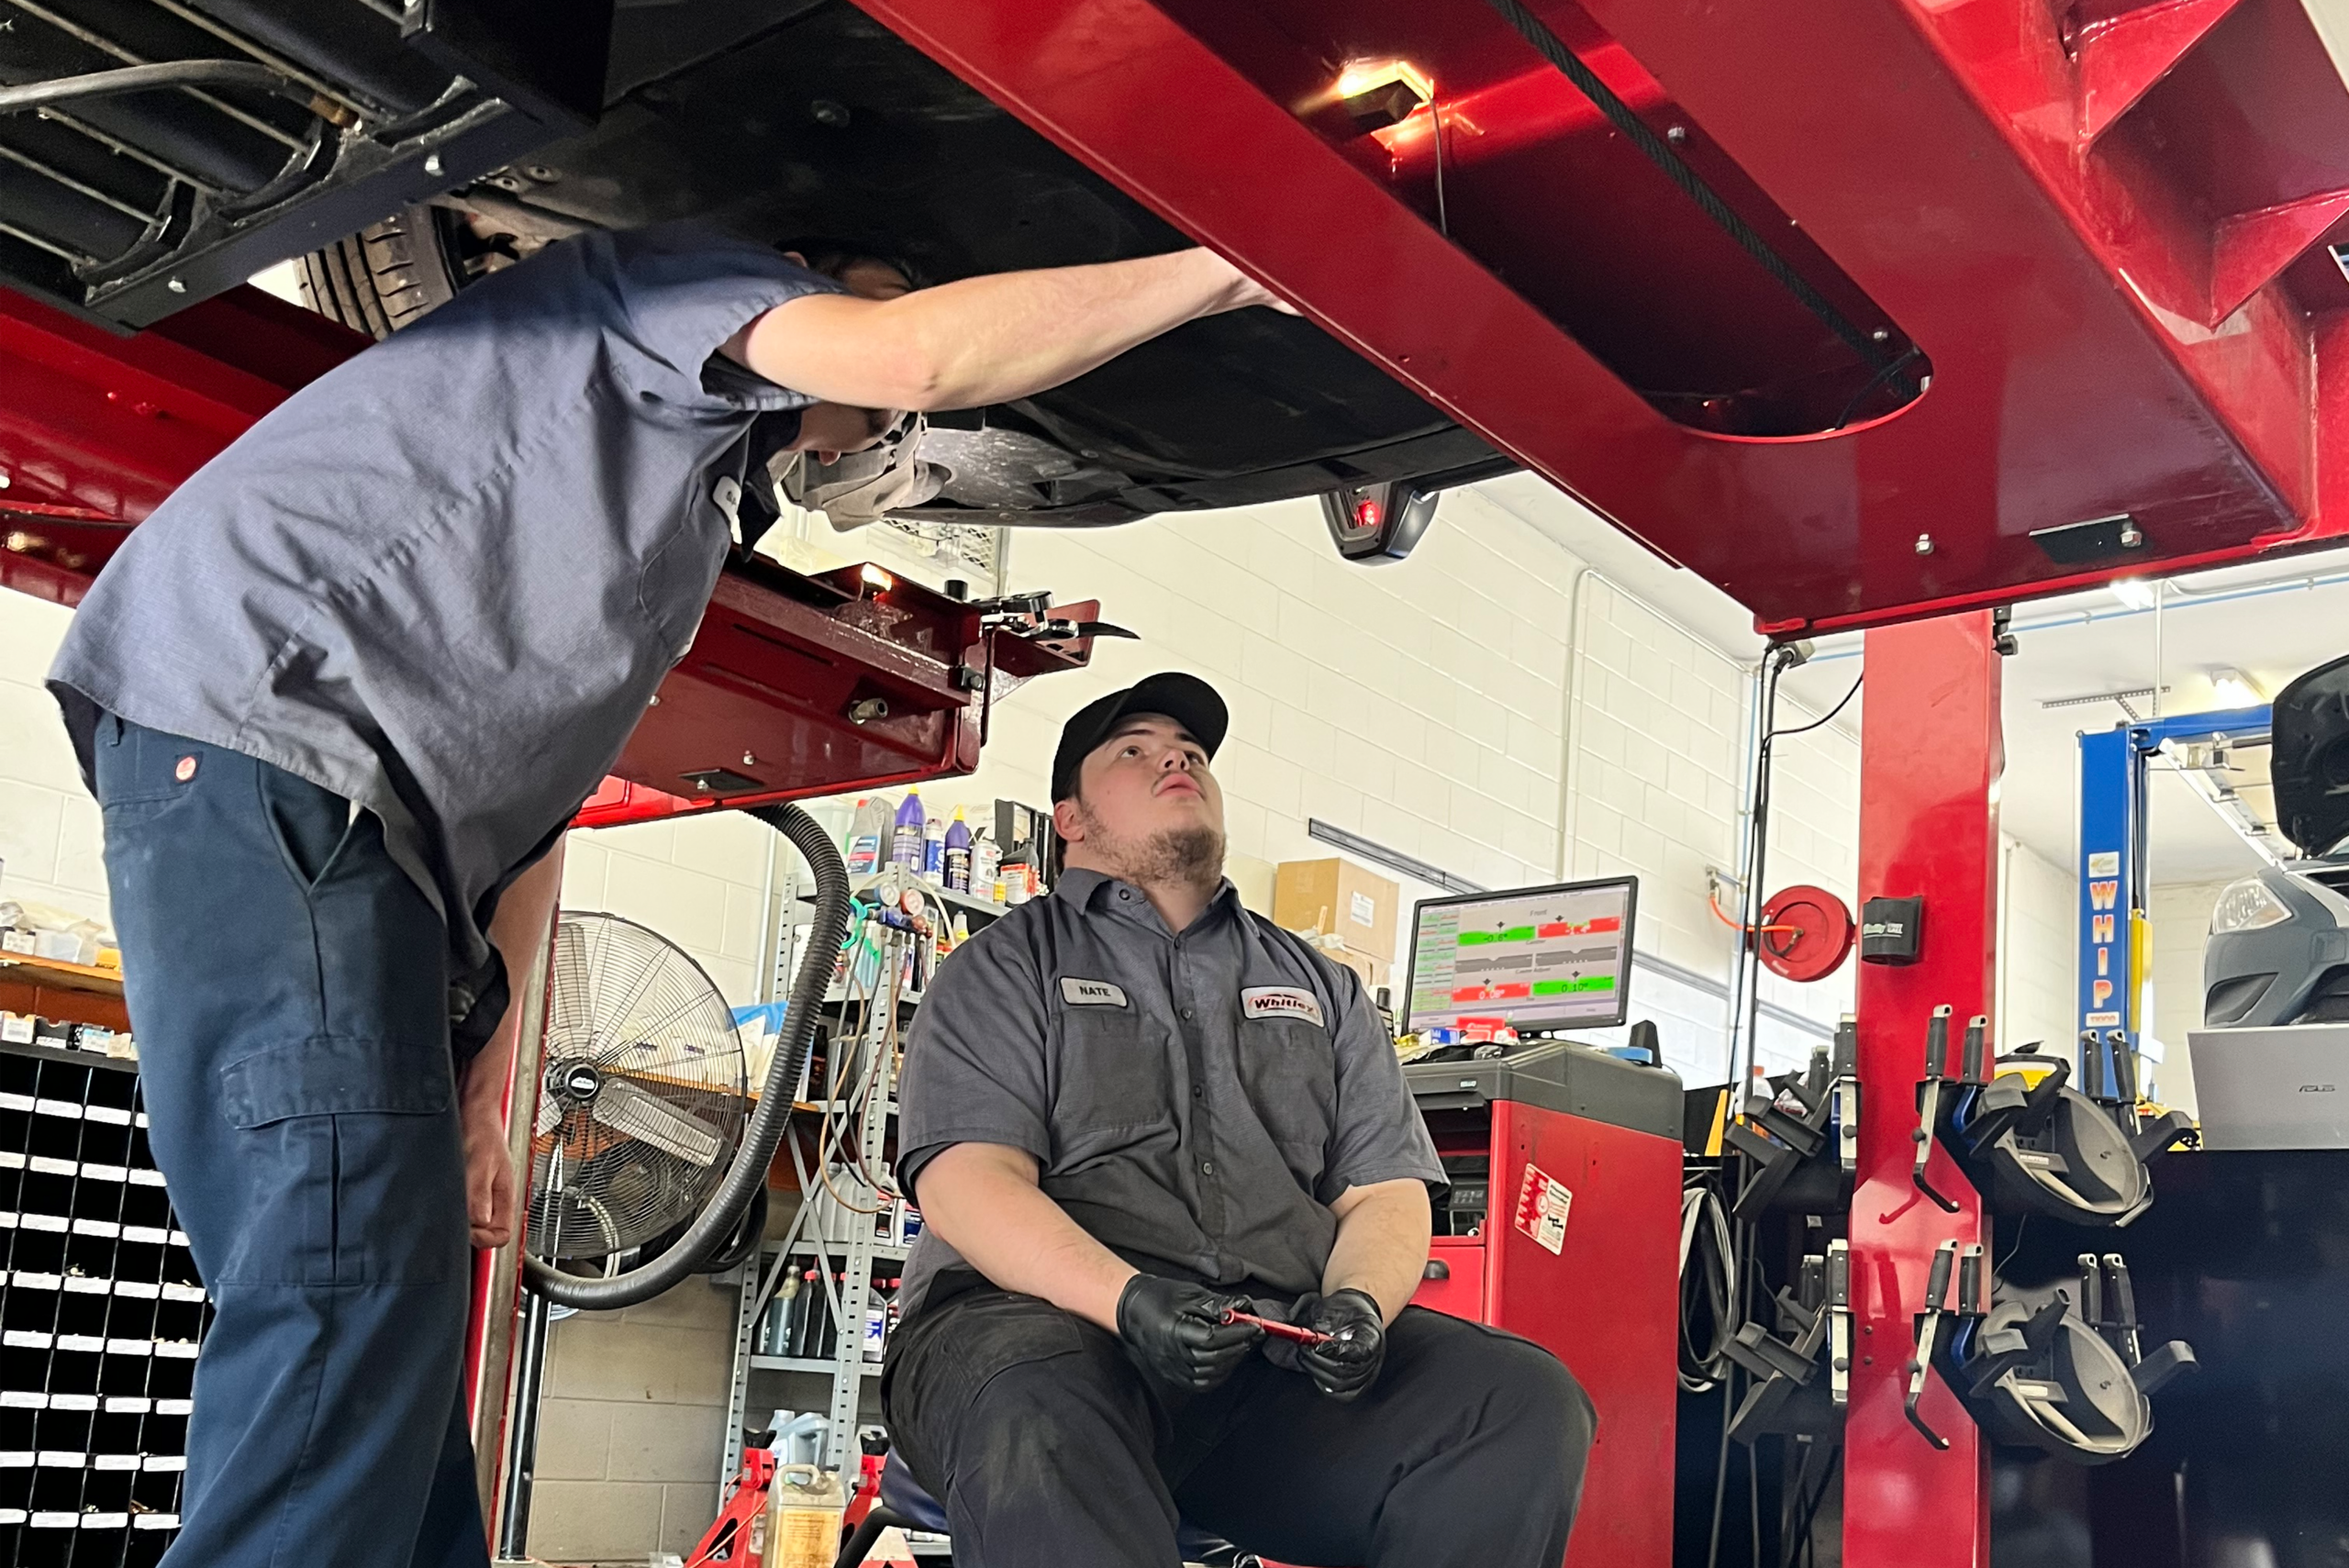 Technicians looking at the underside of a vehicle.